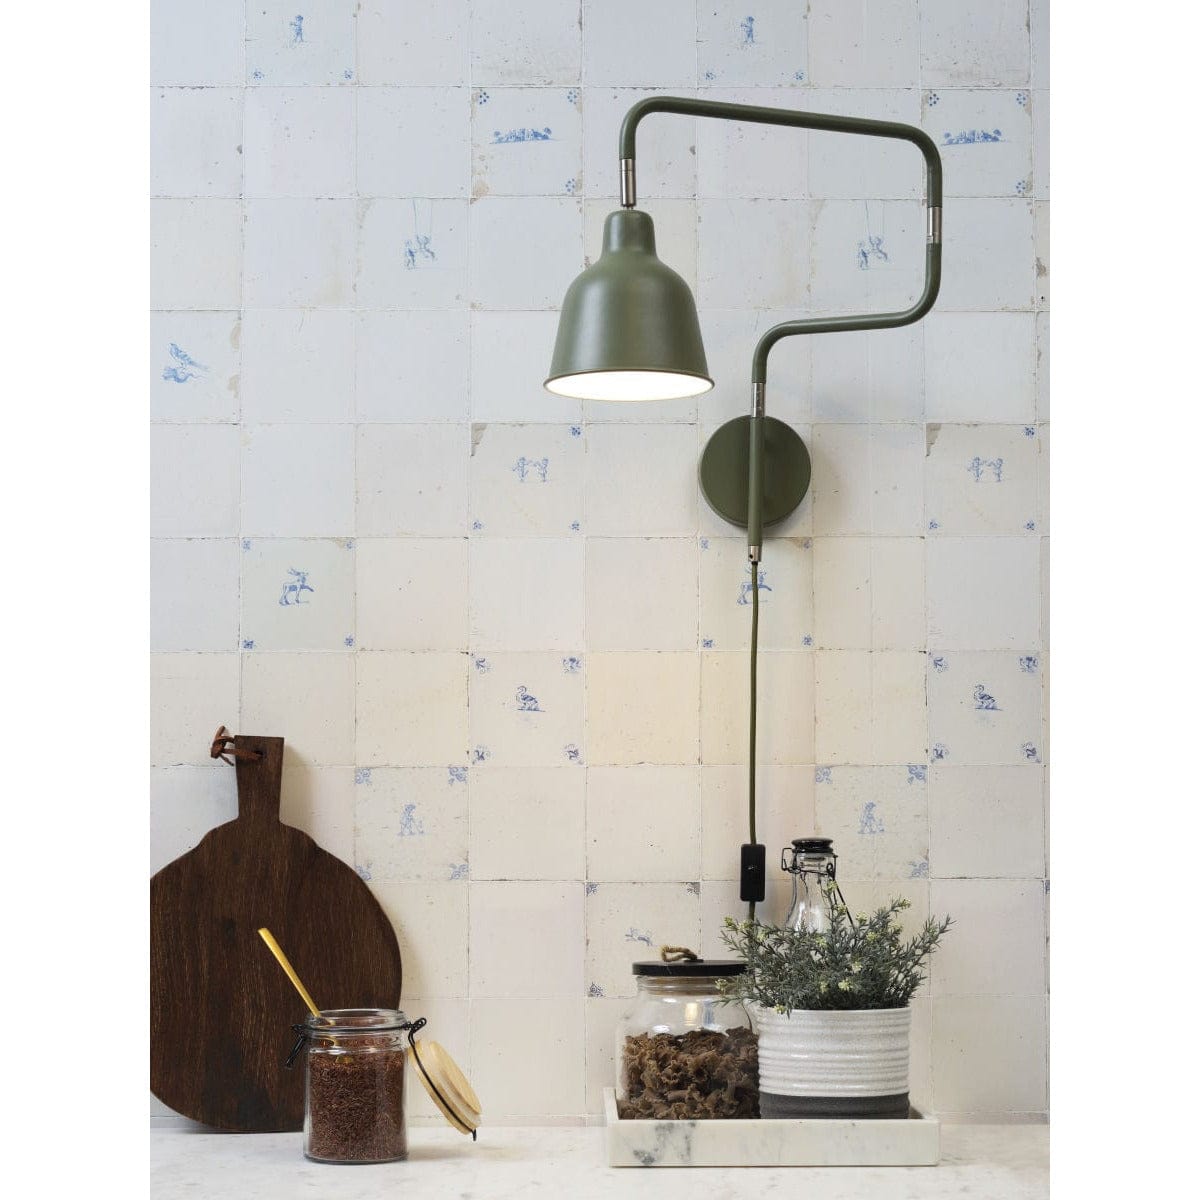 It's About RoMi Wall Lights London Wall Lamp, Black, Olive Green or White